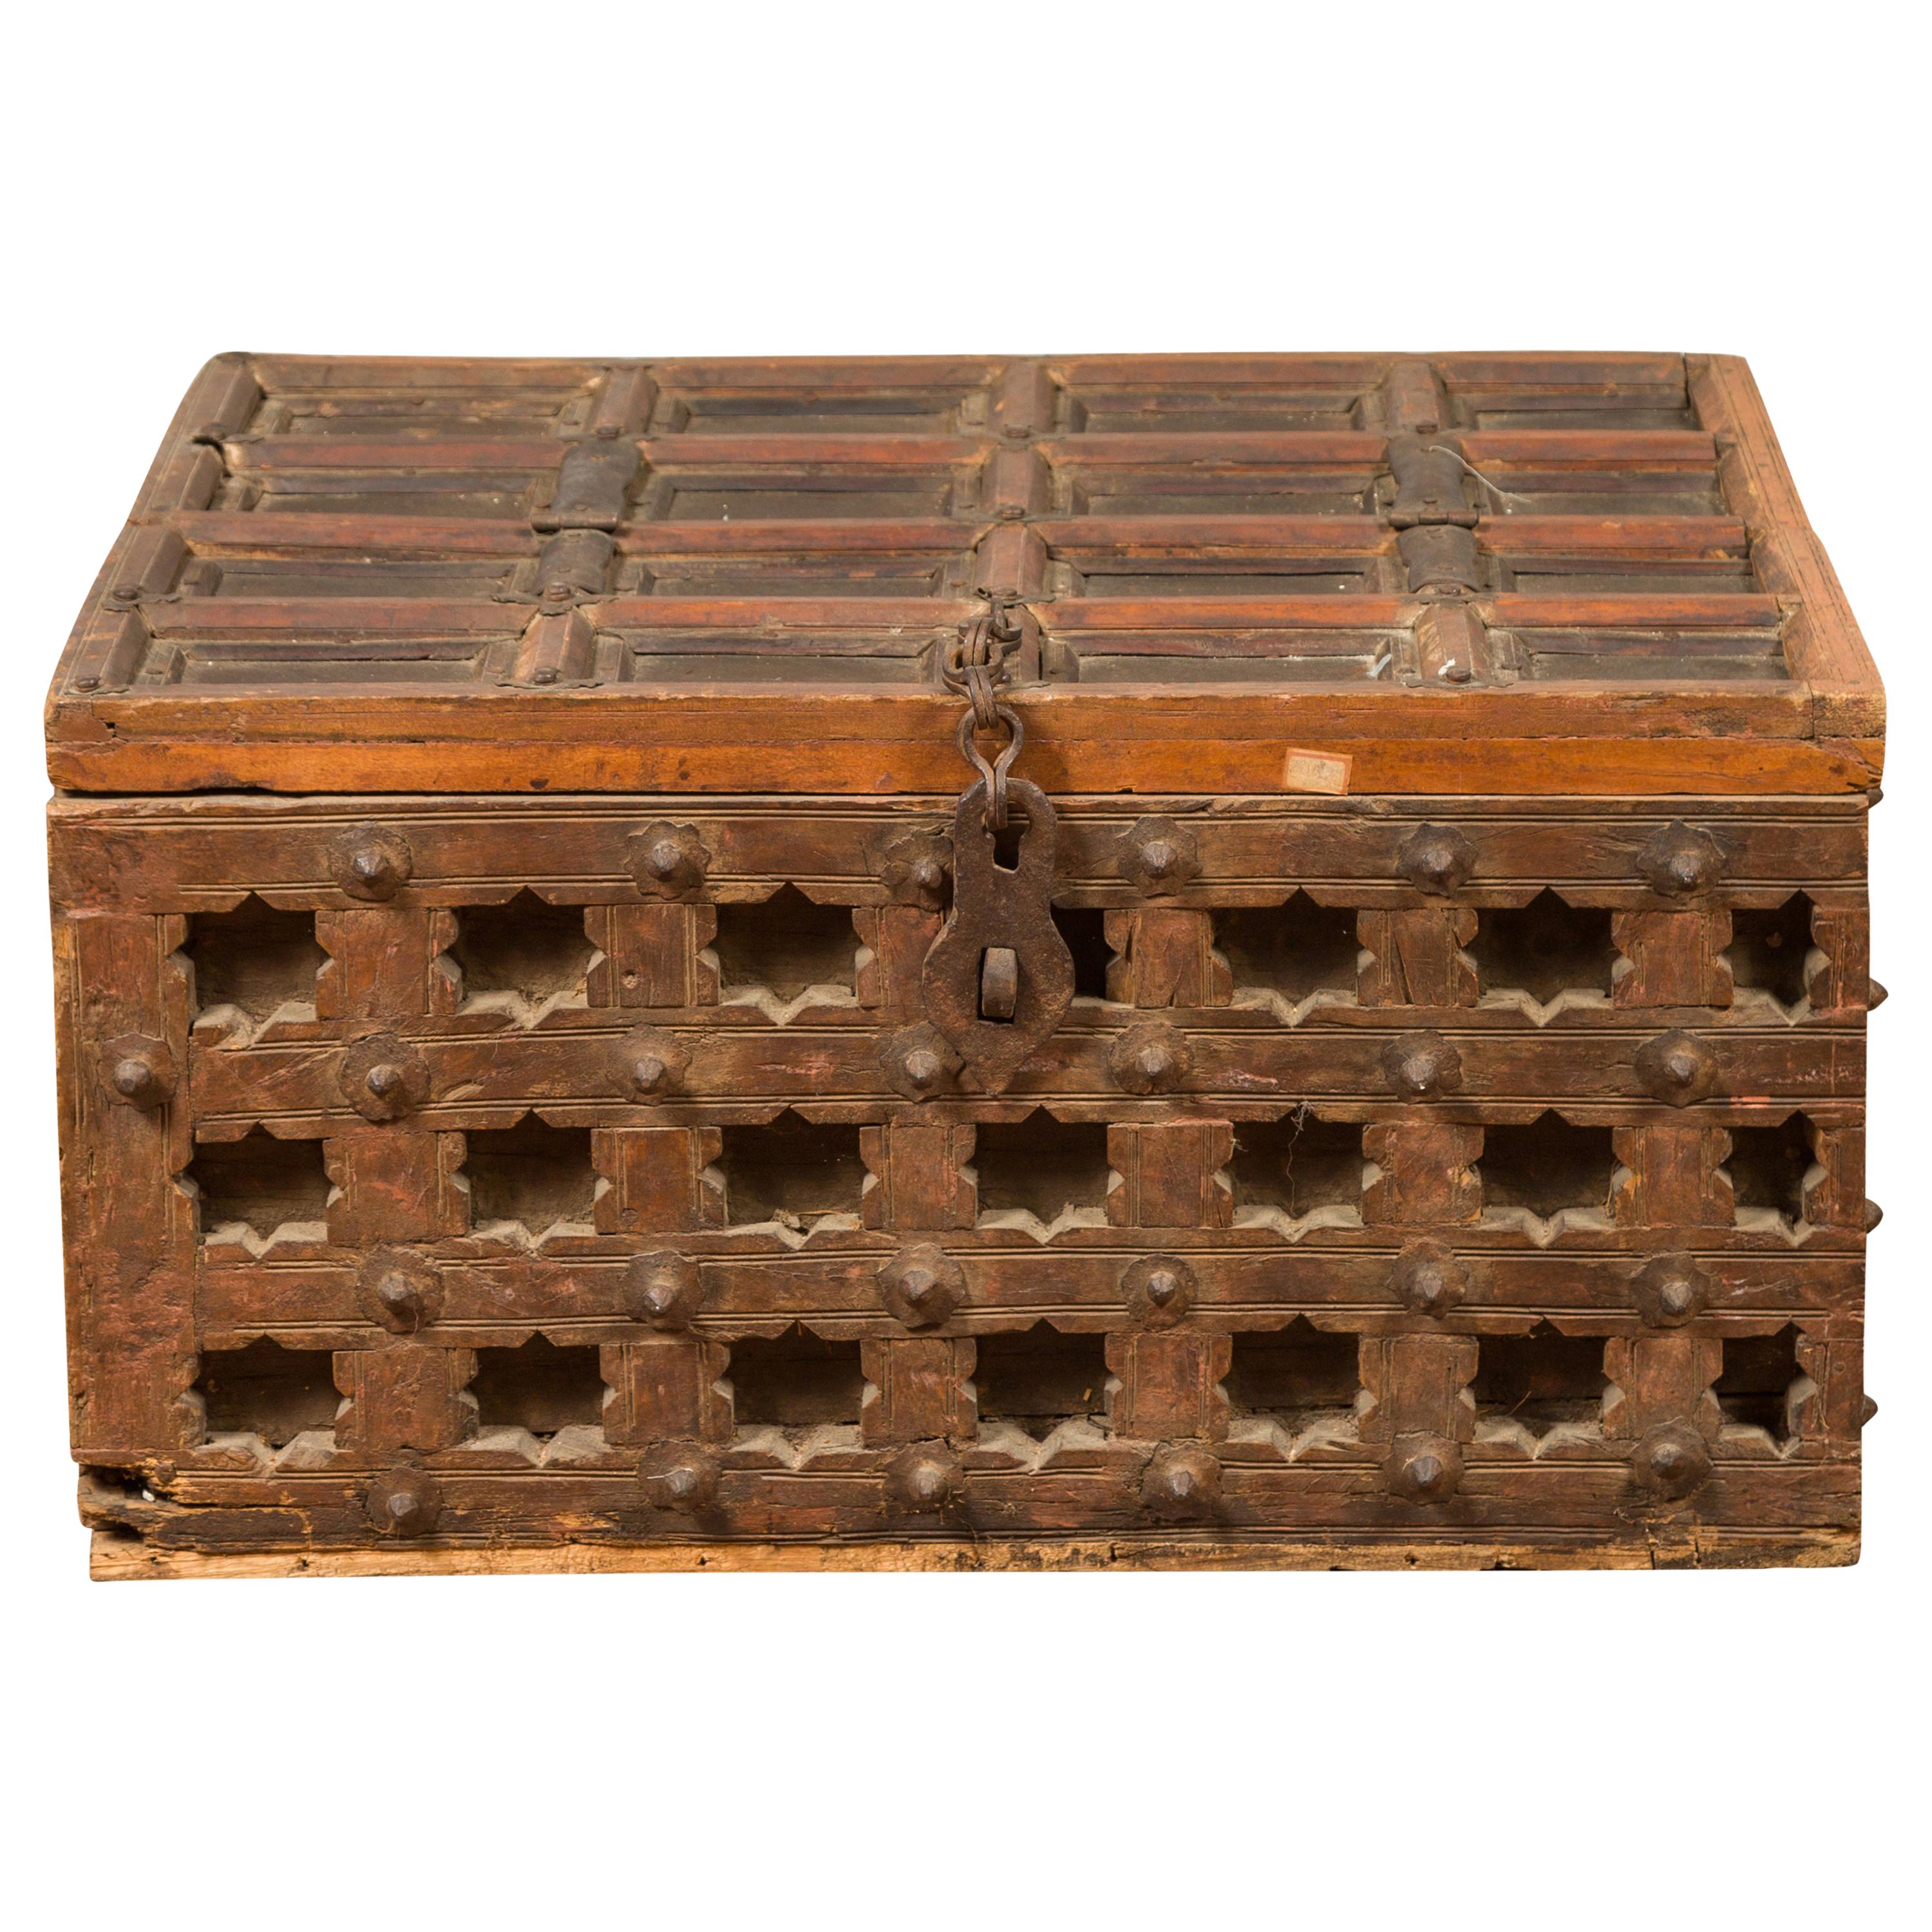 Antique Indian Treasure Chest with Paneled Top, Pierced Stars and Iron Hardware